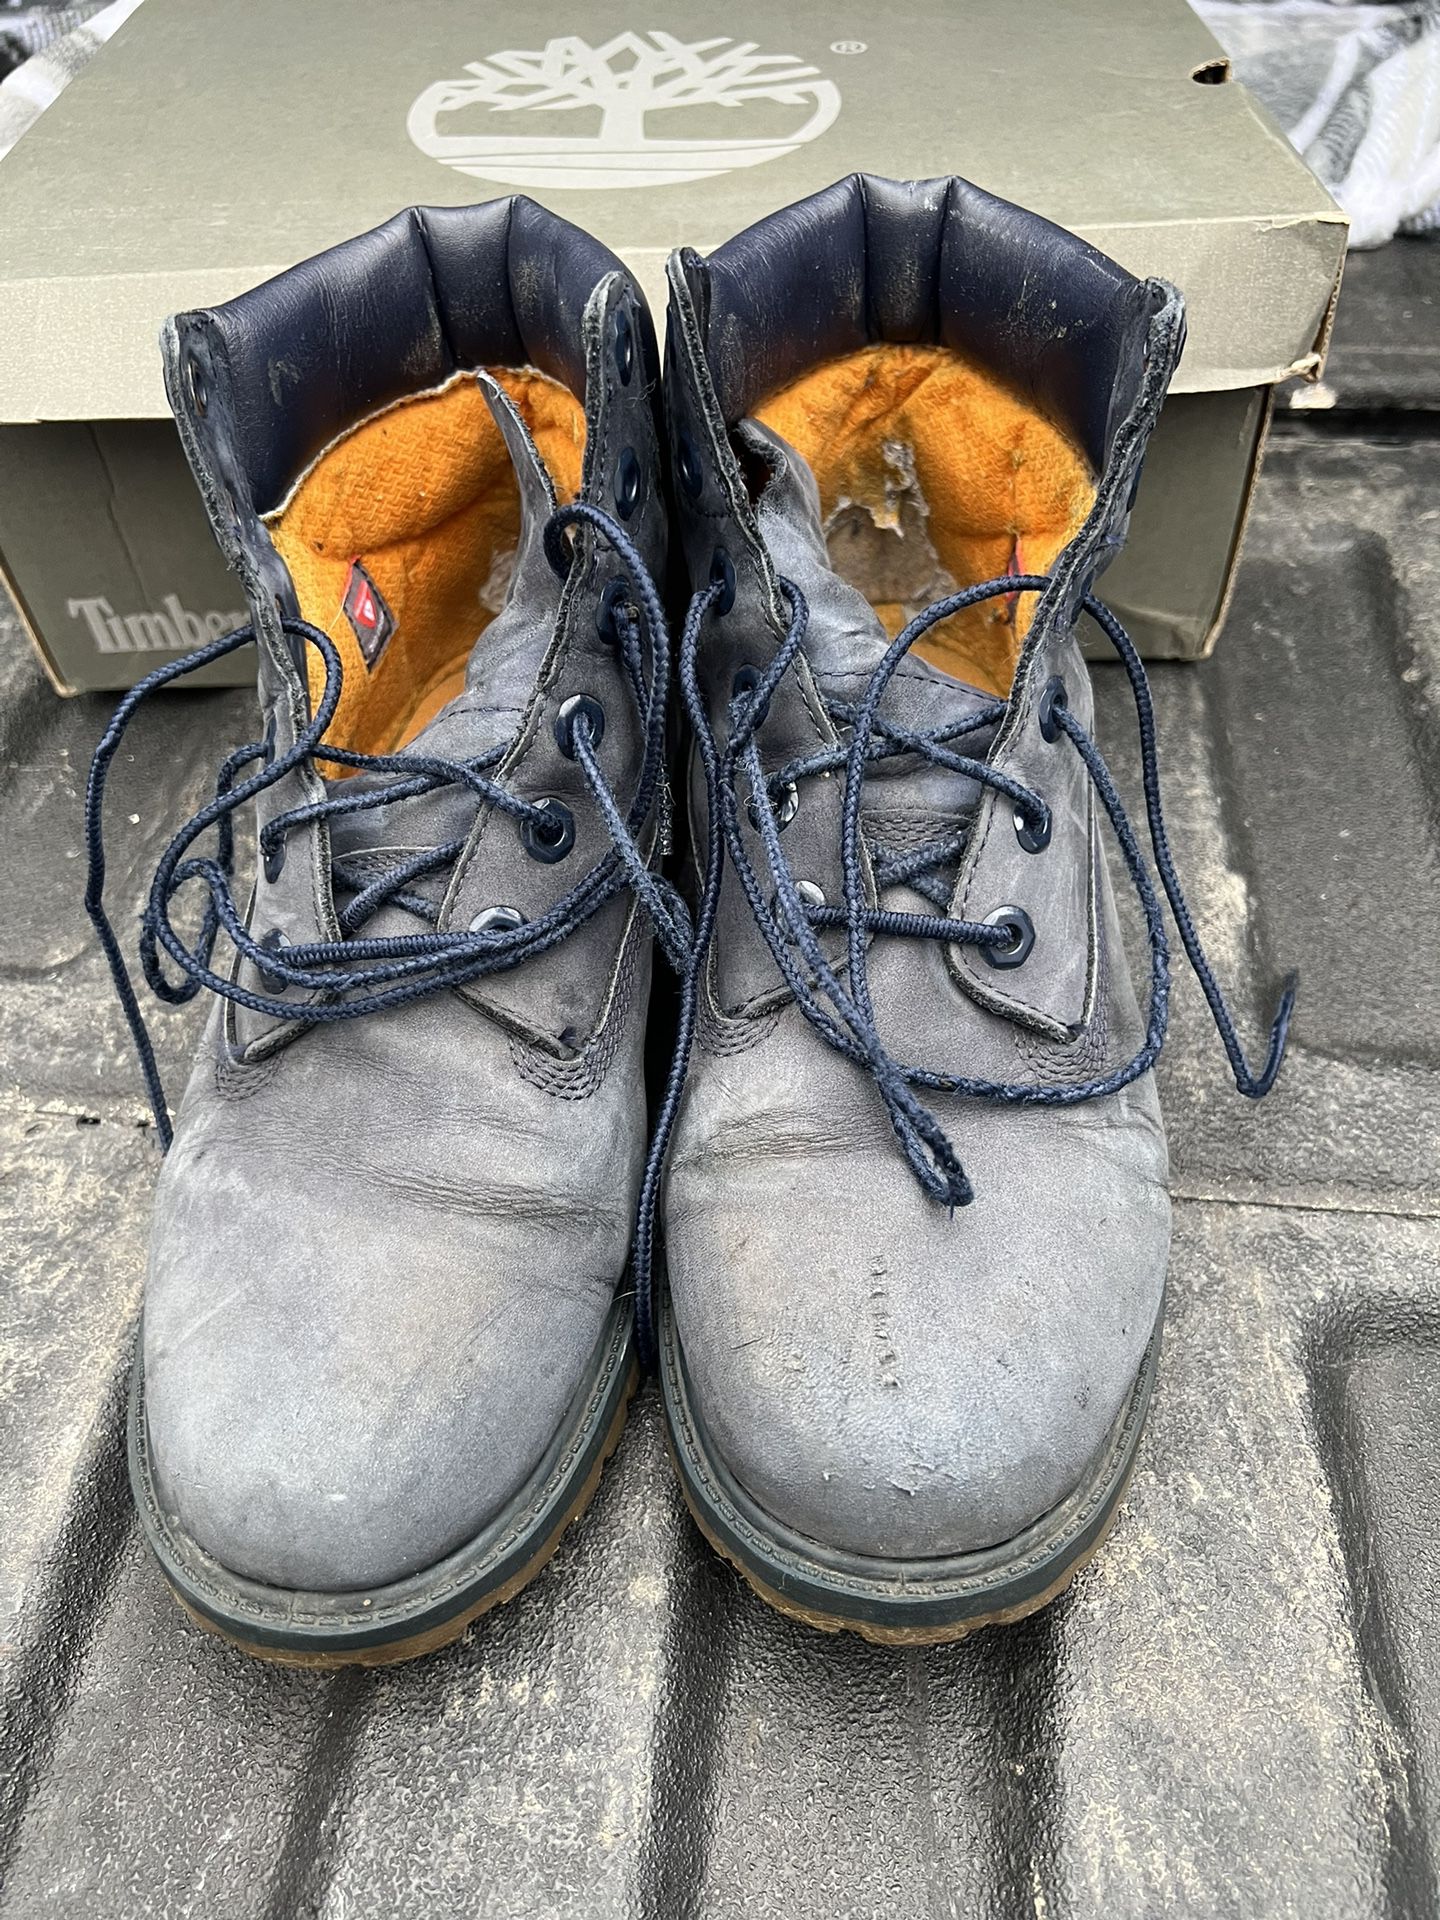 Timberland Juniors work Boots Size 5.5 . Some wear on inside heal see last picture 